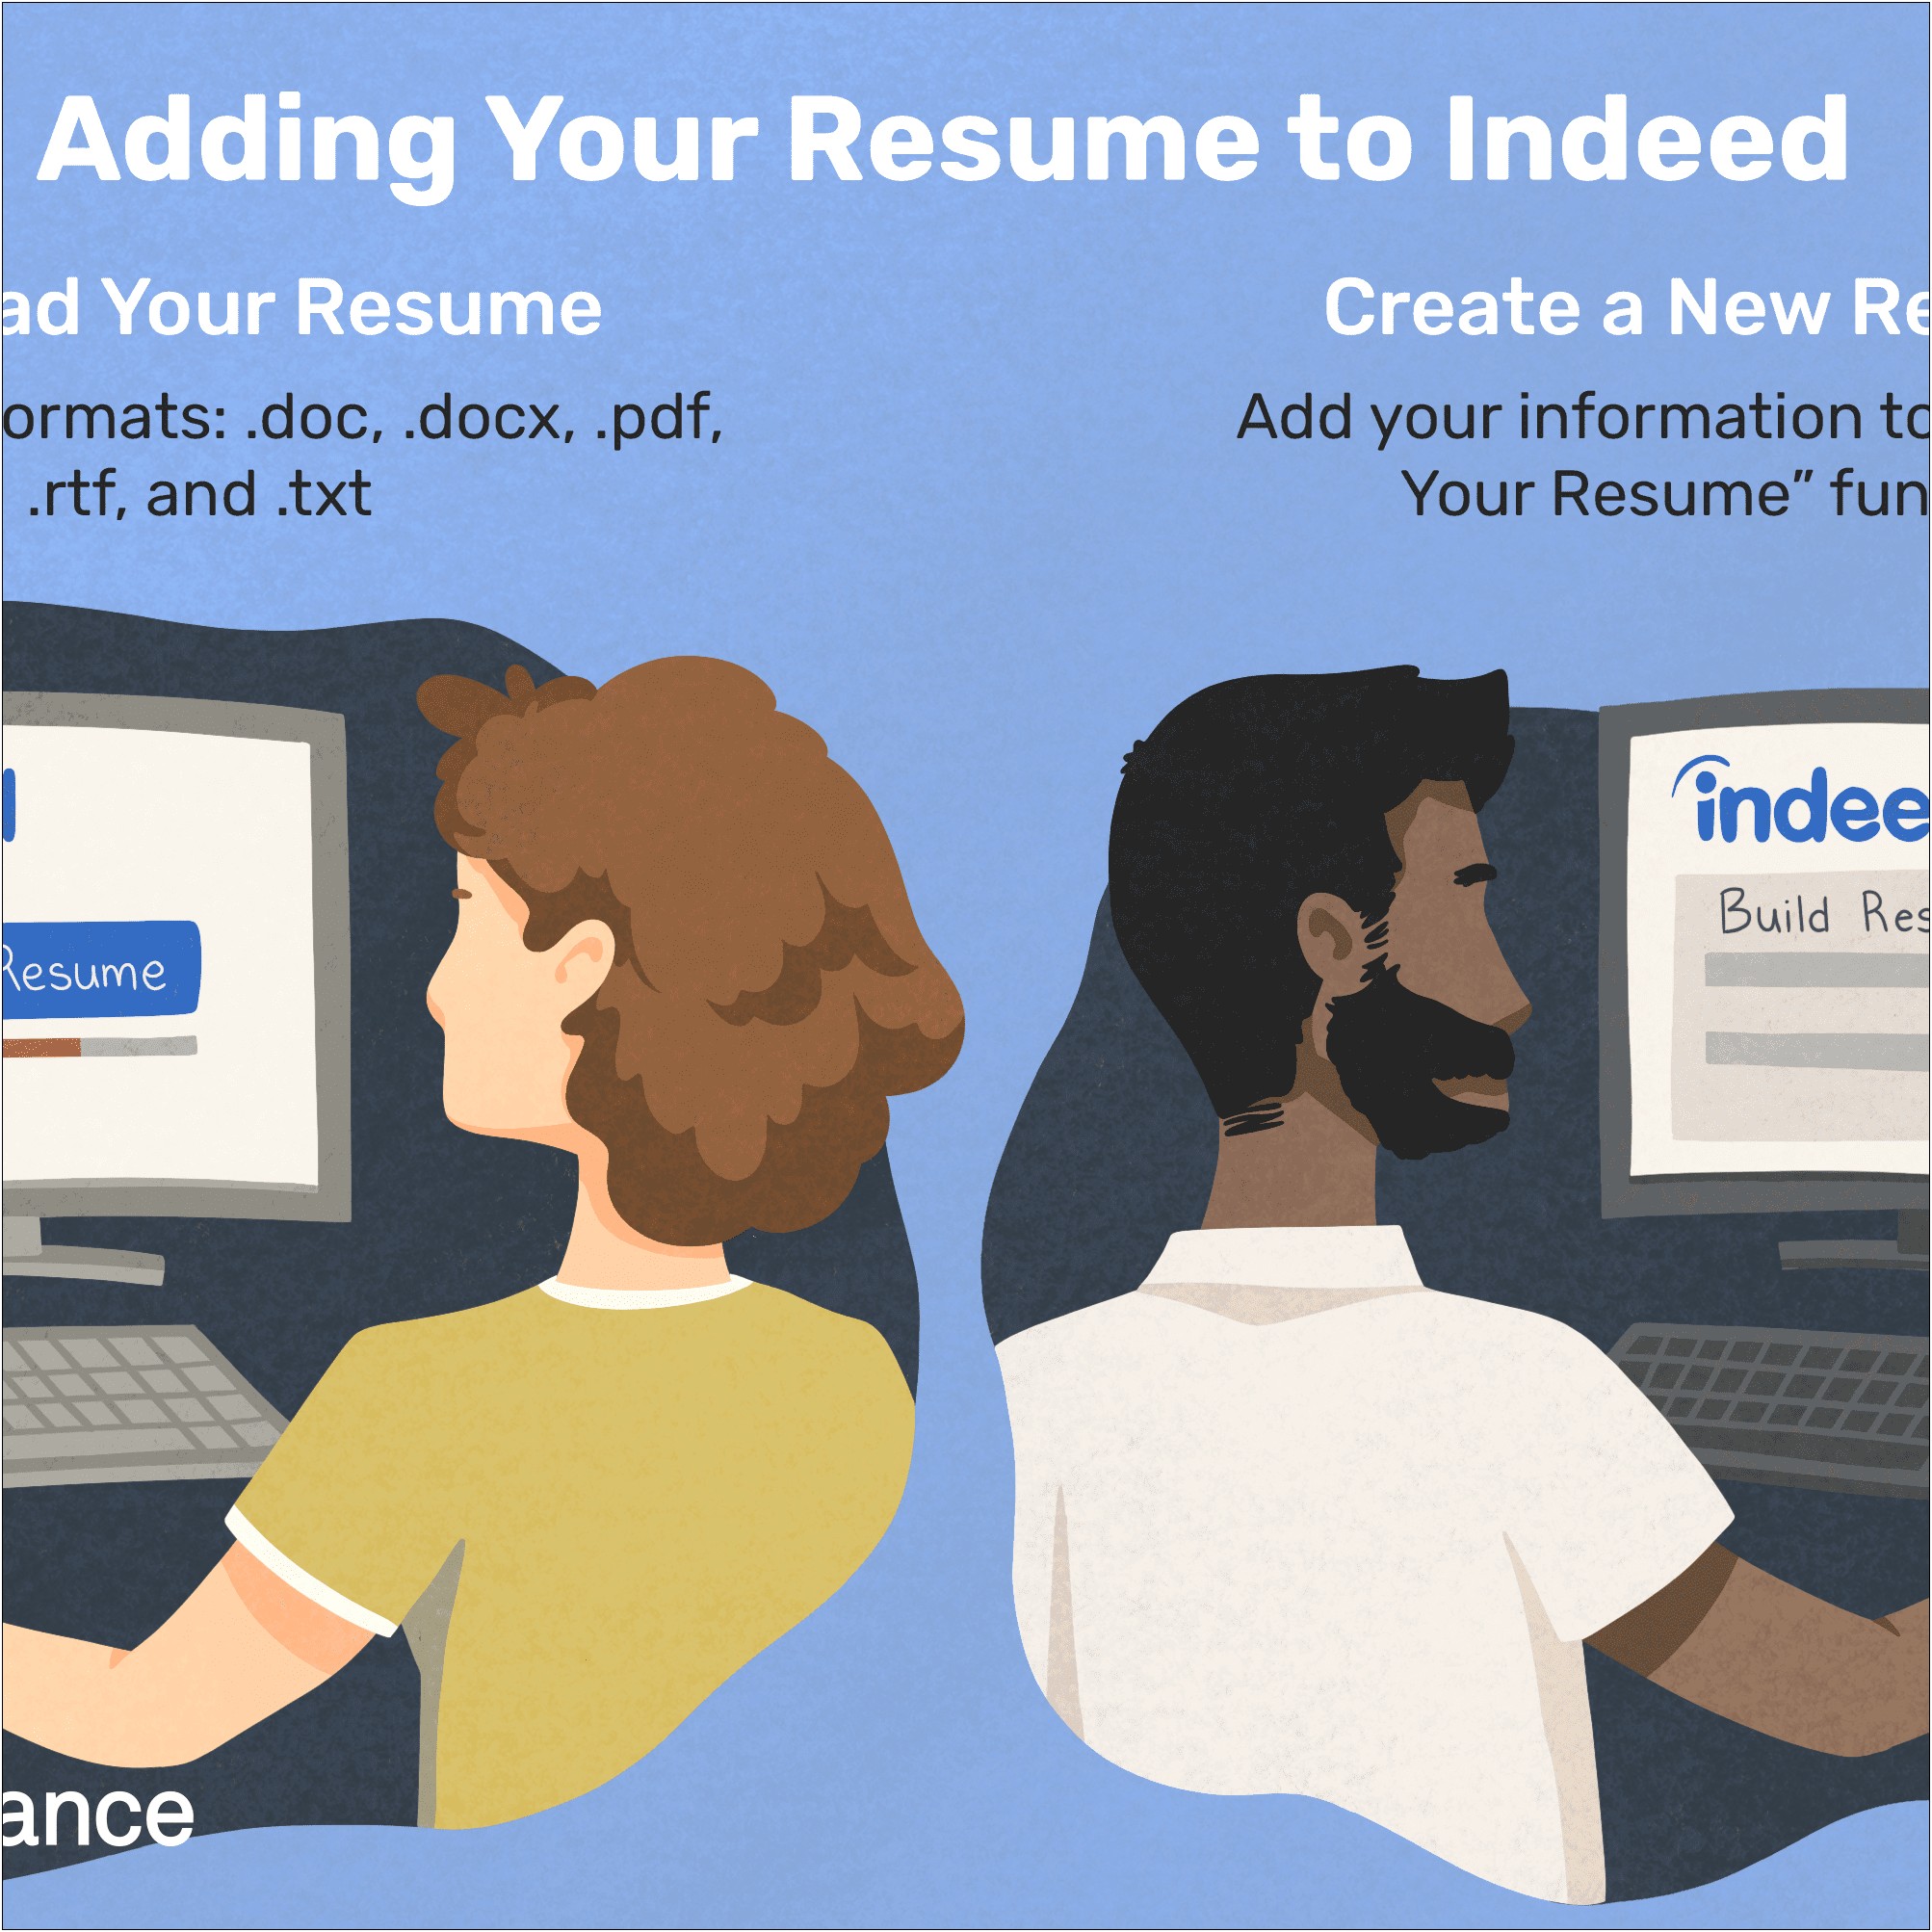 Make Indeed Show Jobs With Resume Match